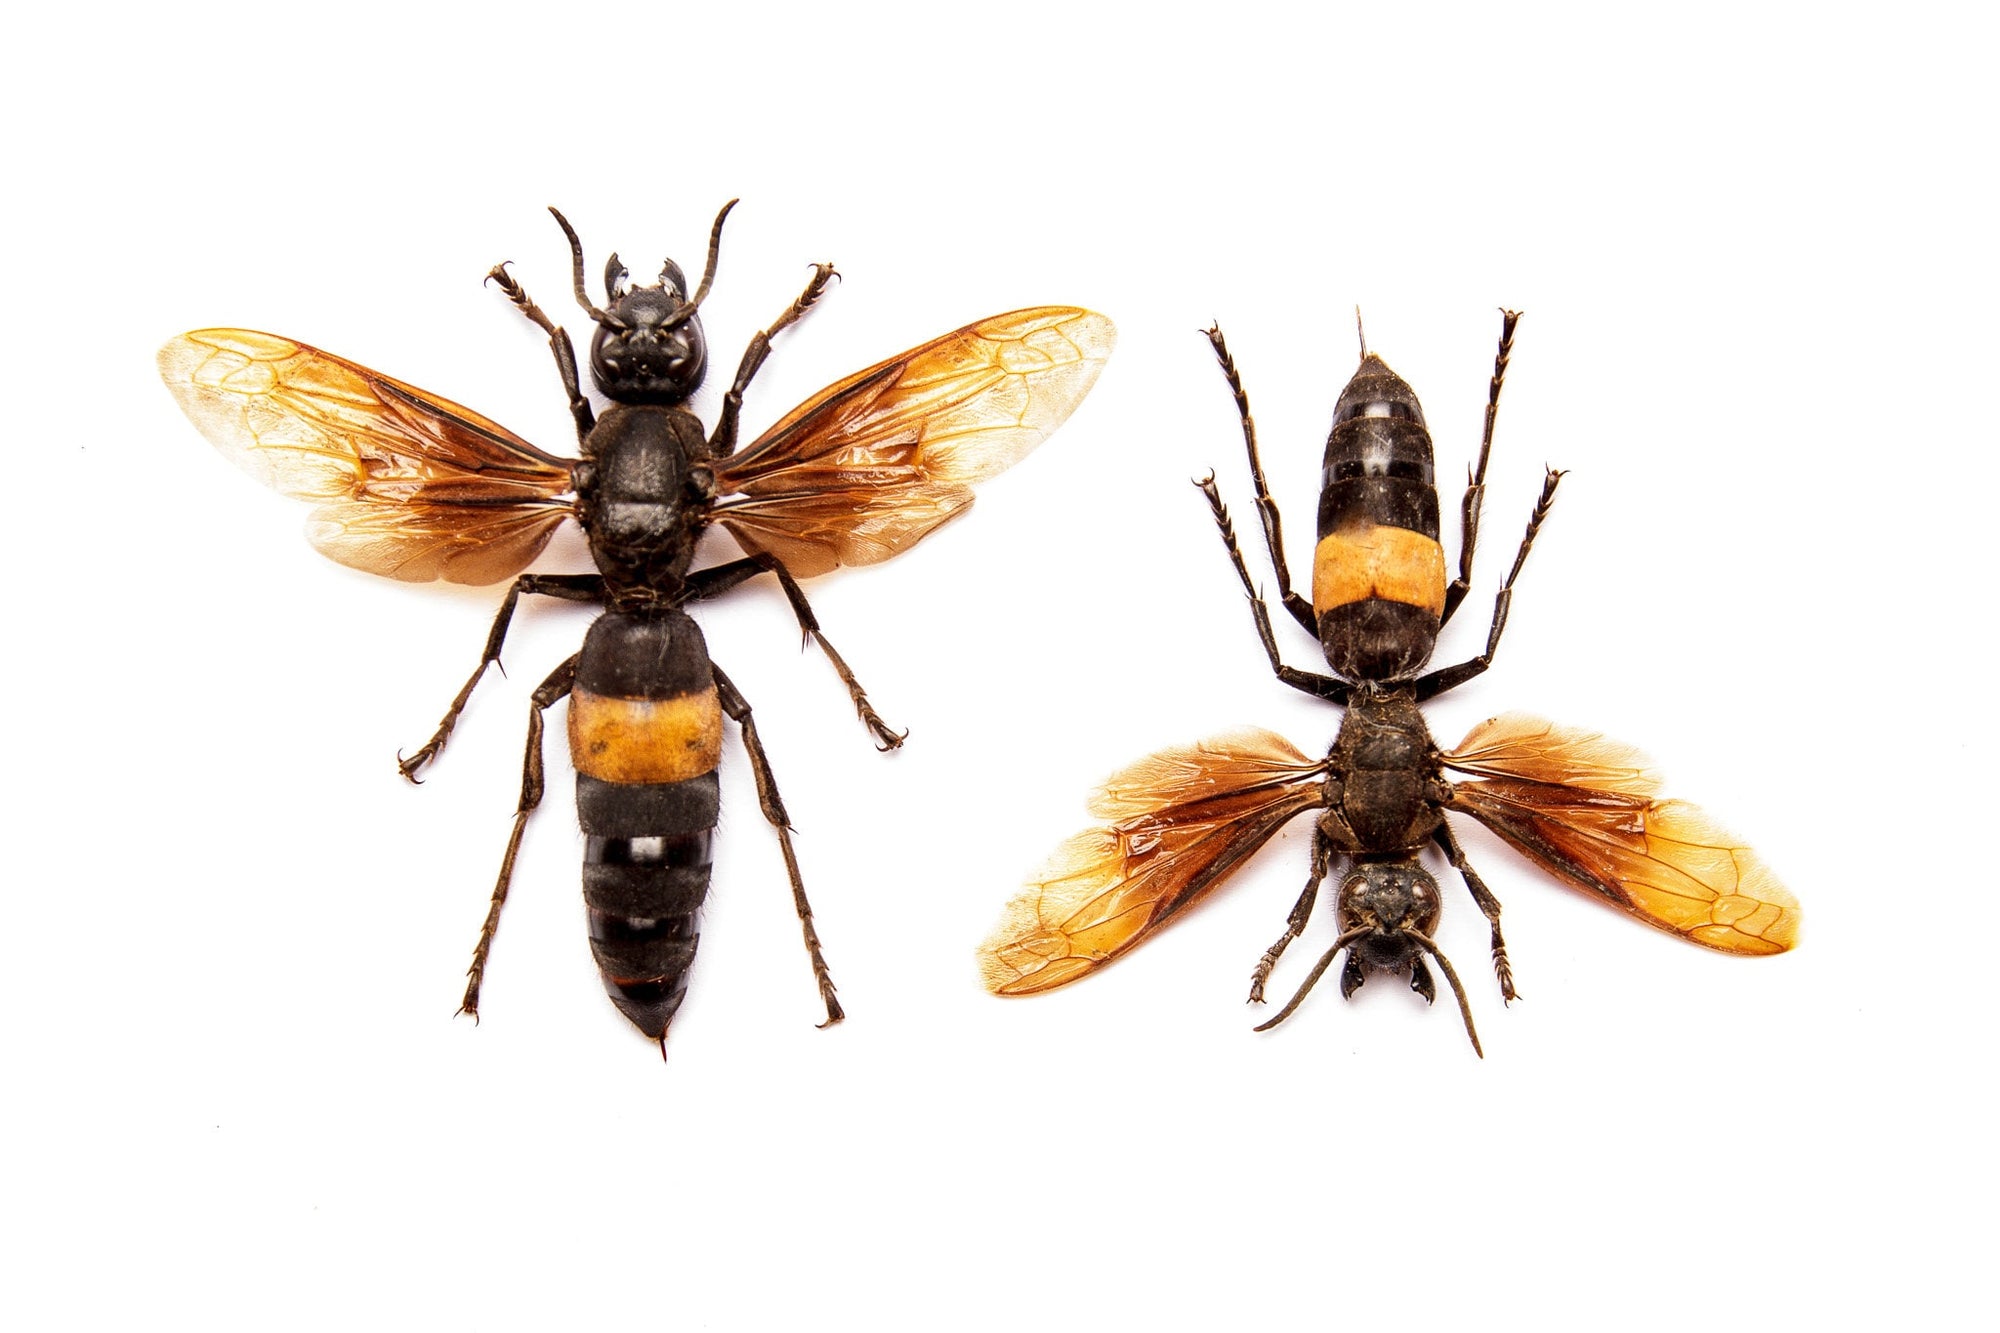 TWO (2) Greater Banded Hornets | Vespa tropica TROPICA | A1 Spread Insect Specimens Entomology Taxidermy